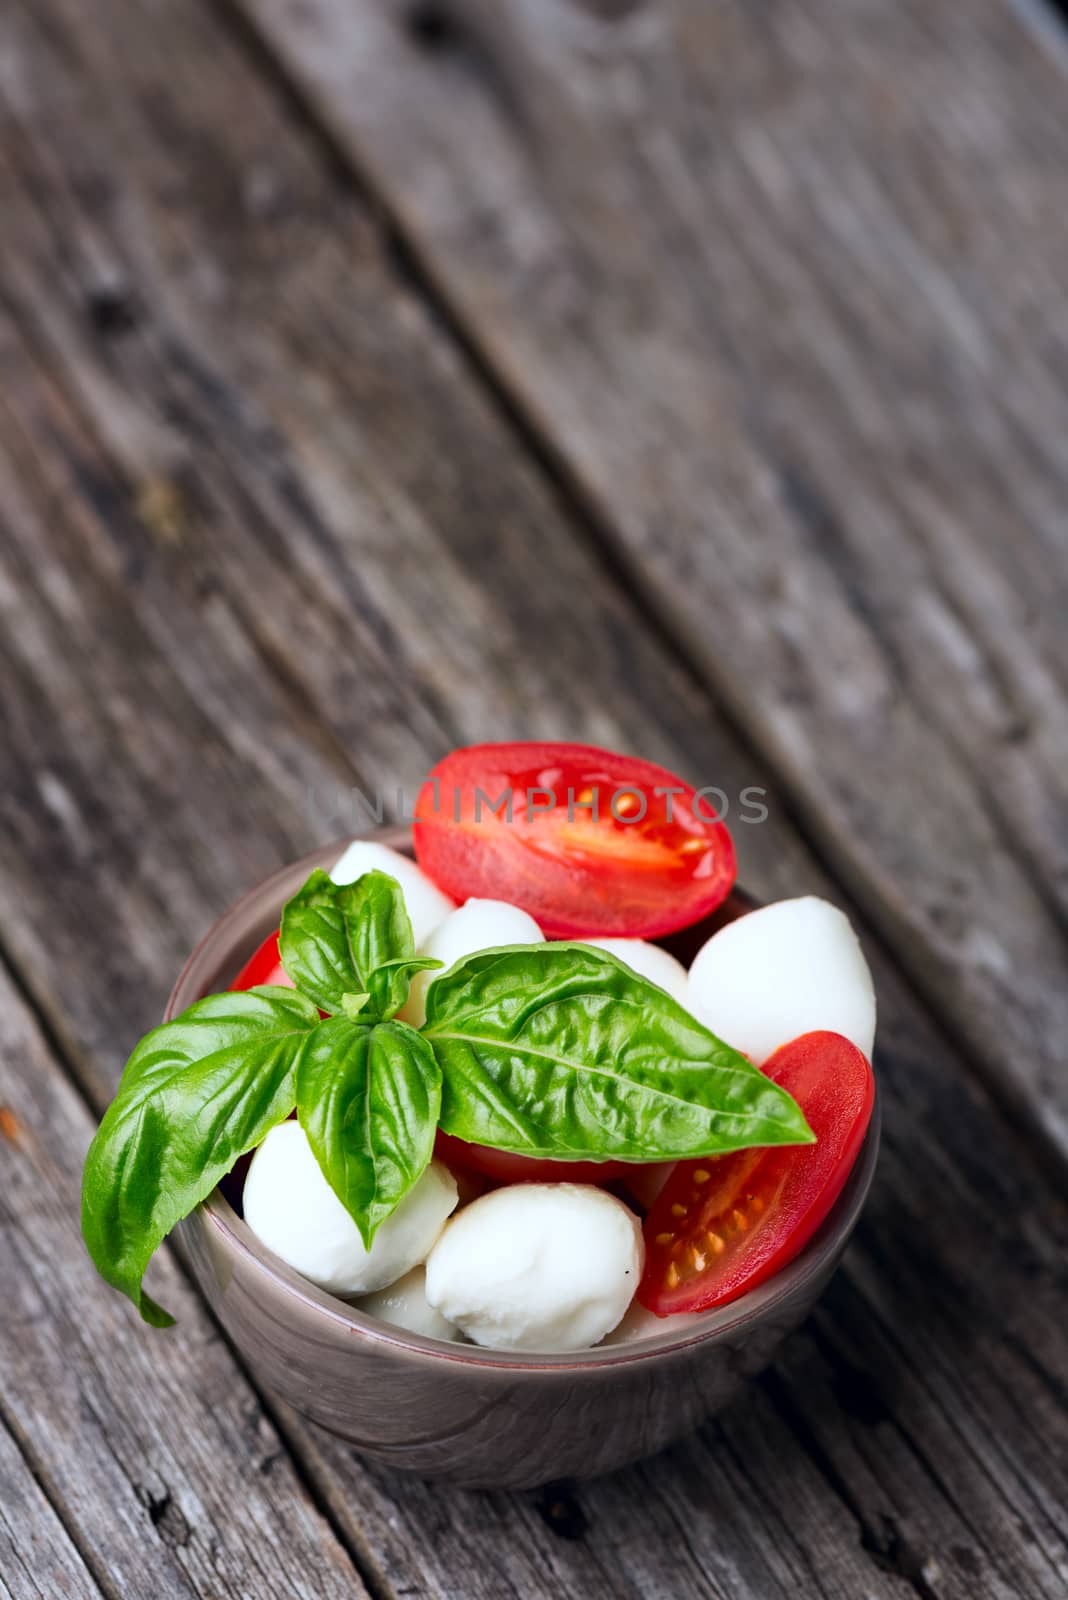 Tomato and mozzarella with basil leaves in bowl by Nanisimova